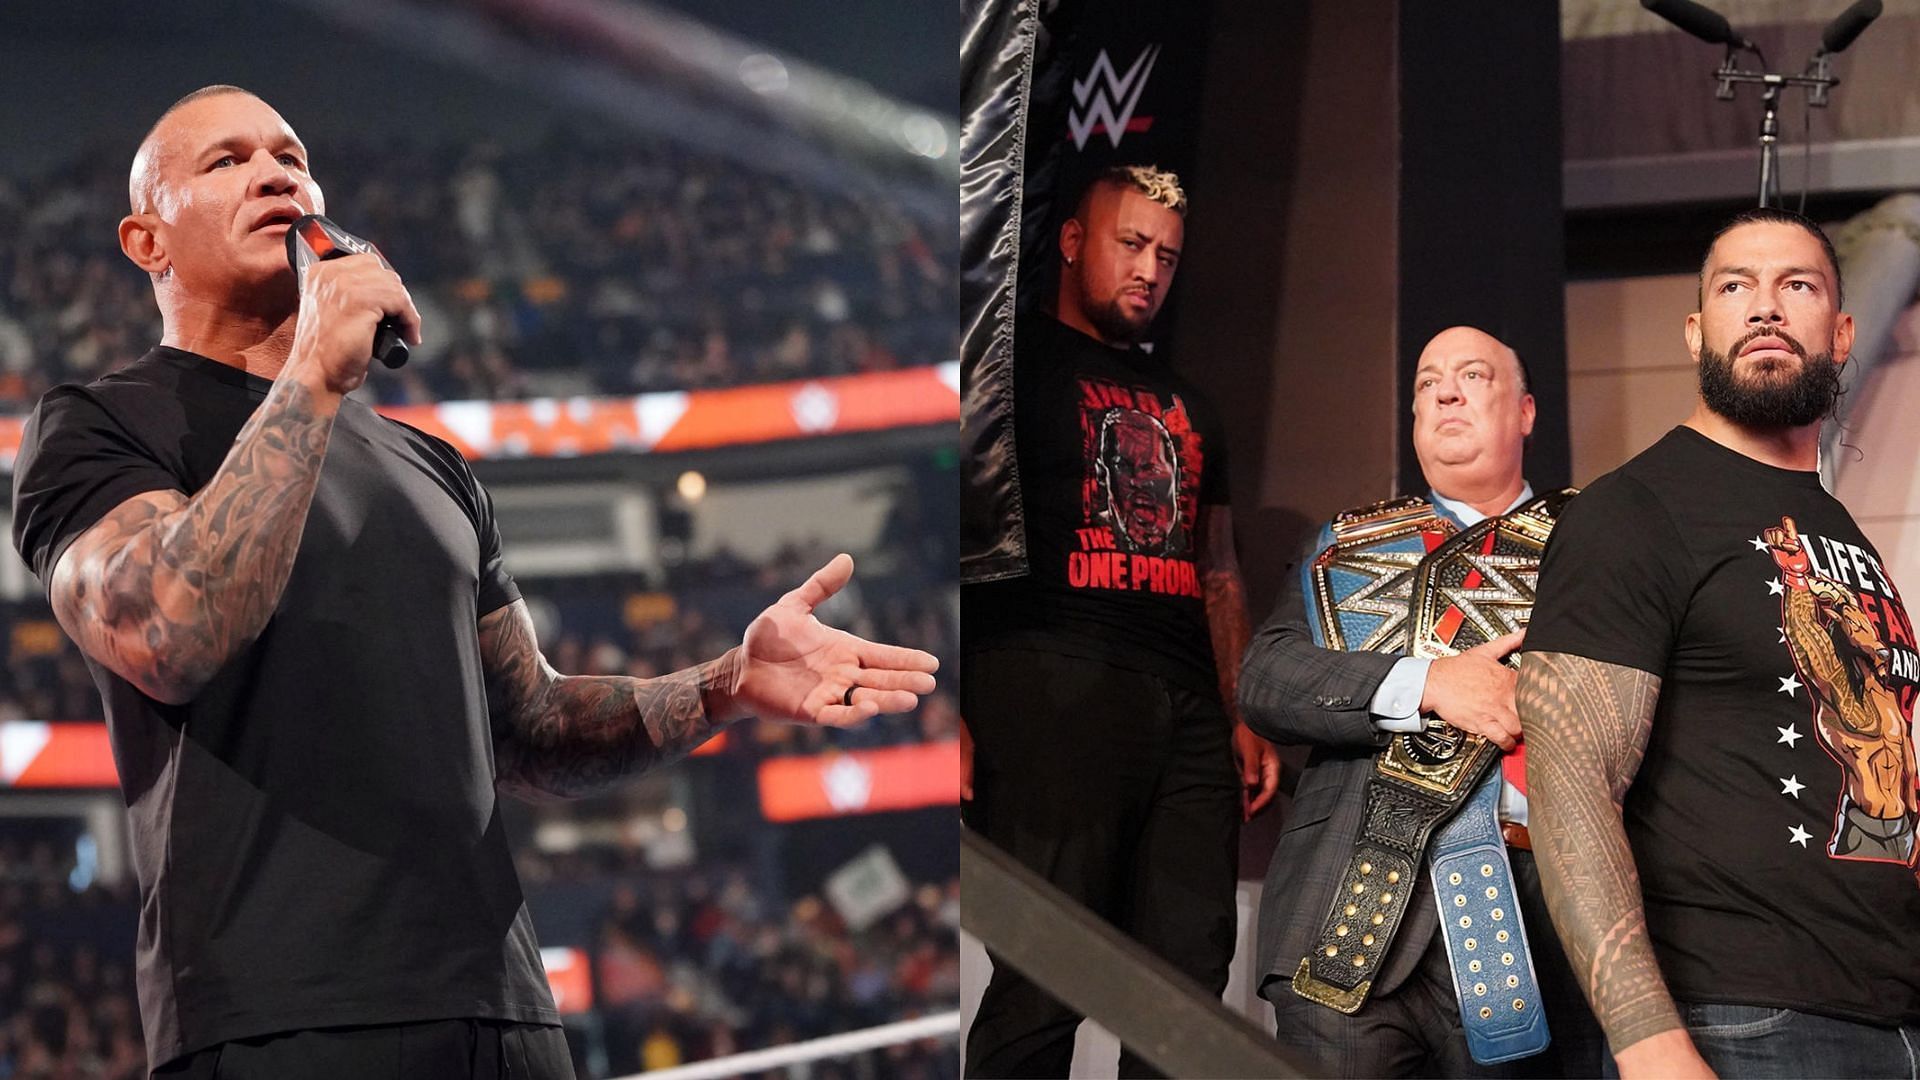 Randy Orton is feuding with The Bloodline